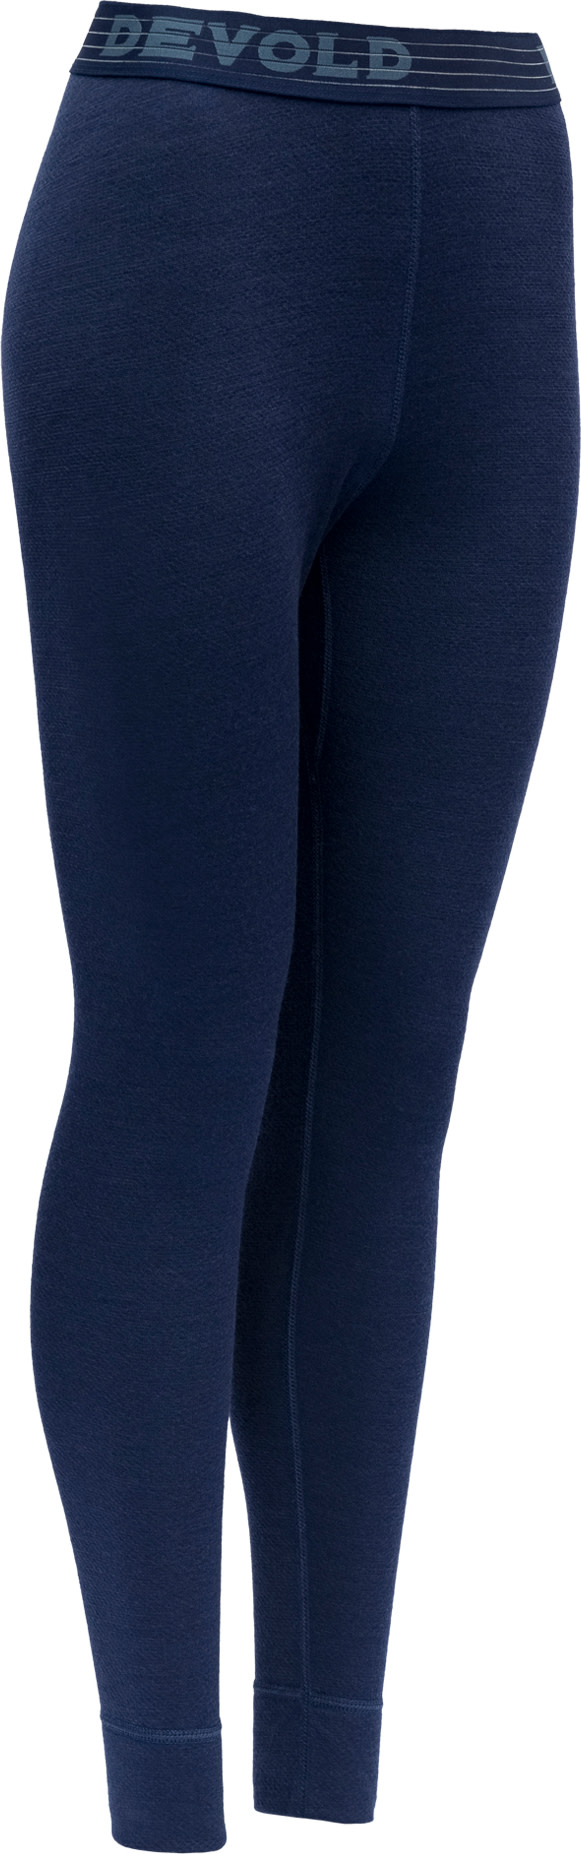 Devold Expedition Woman Long Johns - Merino base layer Women's, Buy online